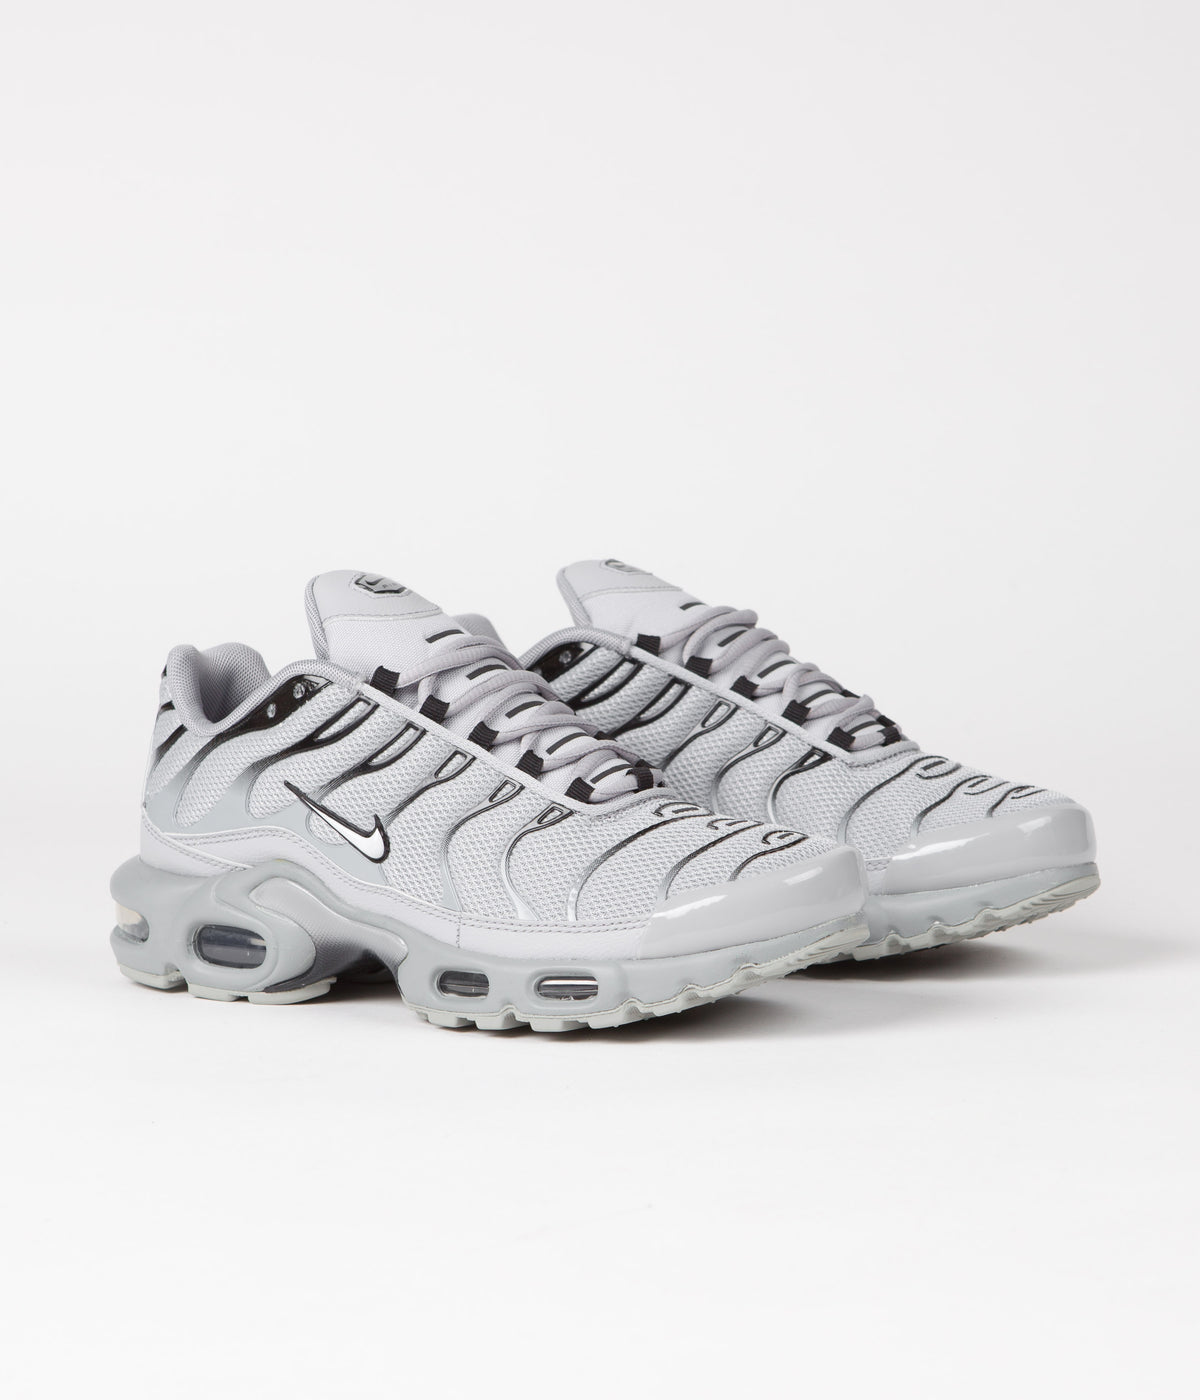 Nike Air Max Plus Shoes - Wolf Grey / White - Black | Always in Colour